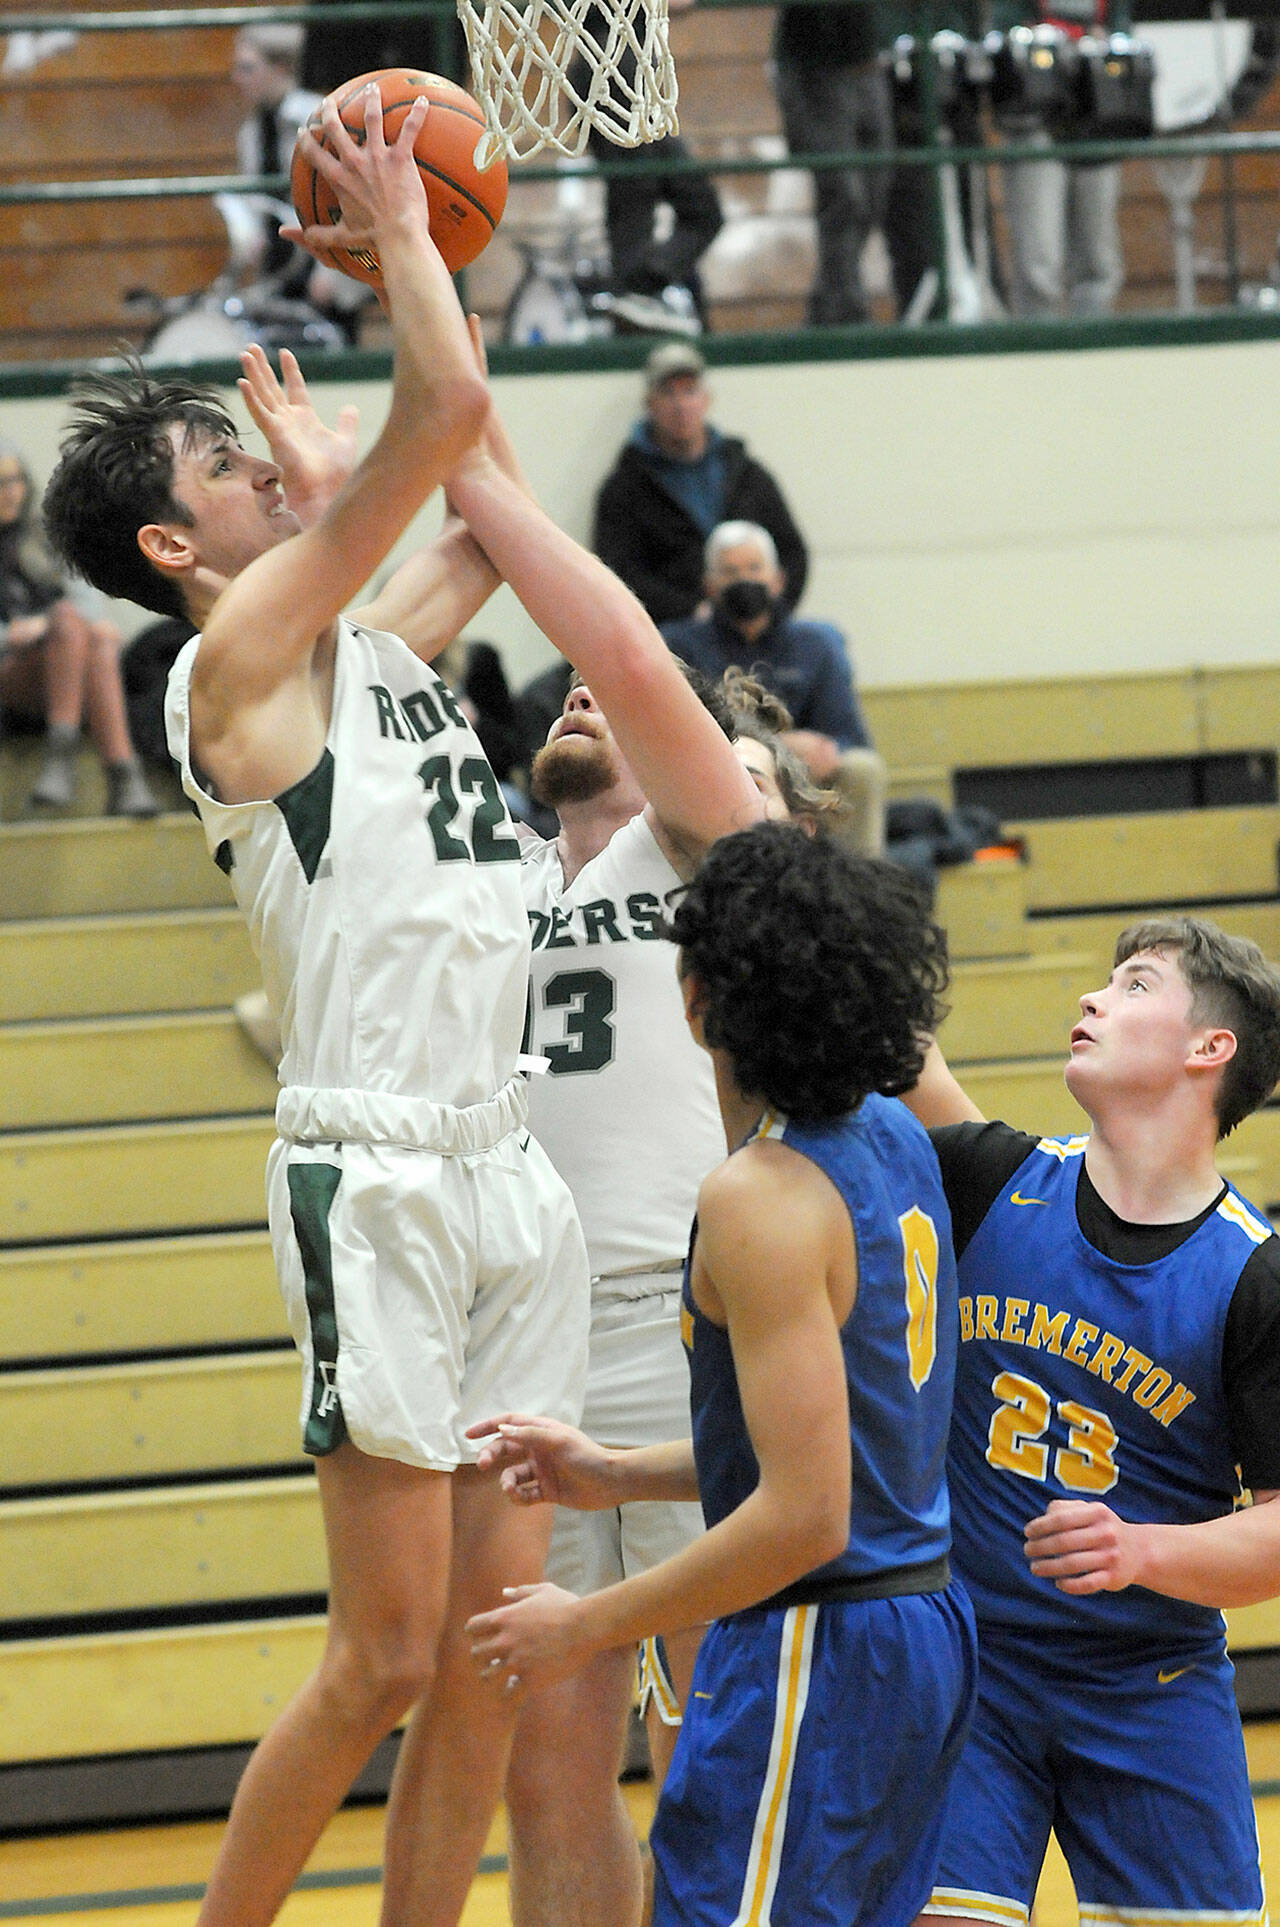 Port Angeles’ Tyler Hunter, left, grabs a rebound as teammate Ezra Townsend backs him up while Bremerton’s Trevon Pietz, front, and Oliver Christian, left, look for an opportunity on Tuesday night in Port Angeles. (Keith Thorpe/Peninsula Daily News)